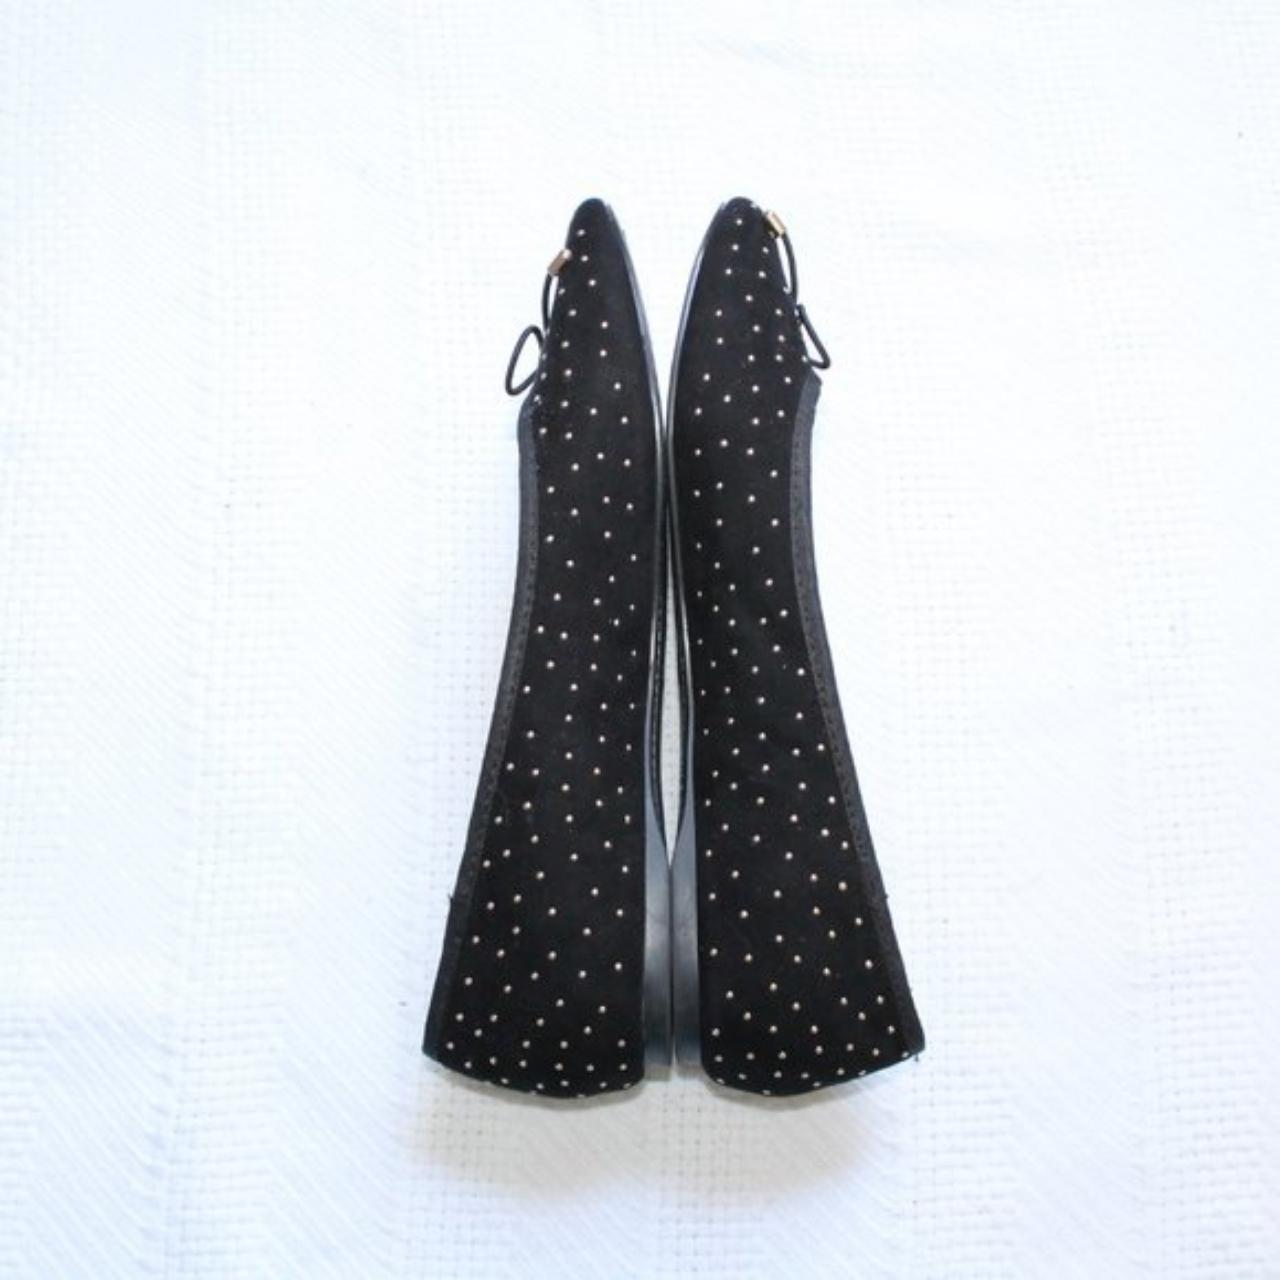 Product Image 4 - Outer Material: Fabric
Inner Material: Manmade
Sole: